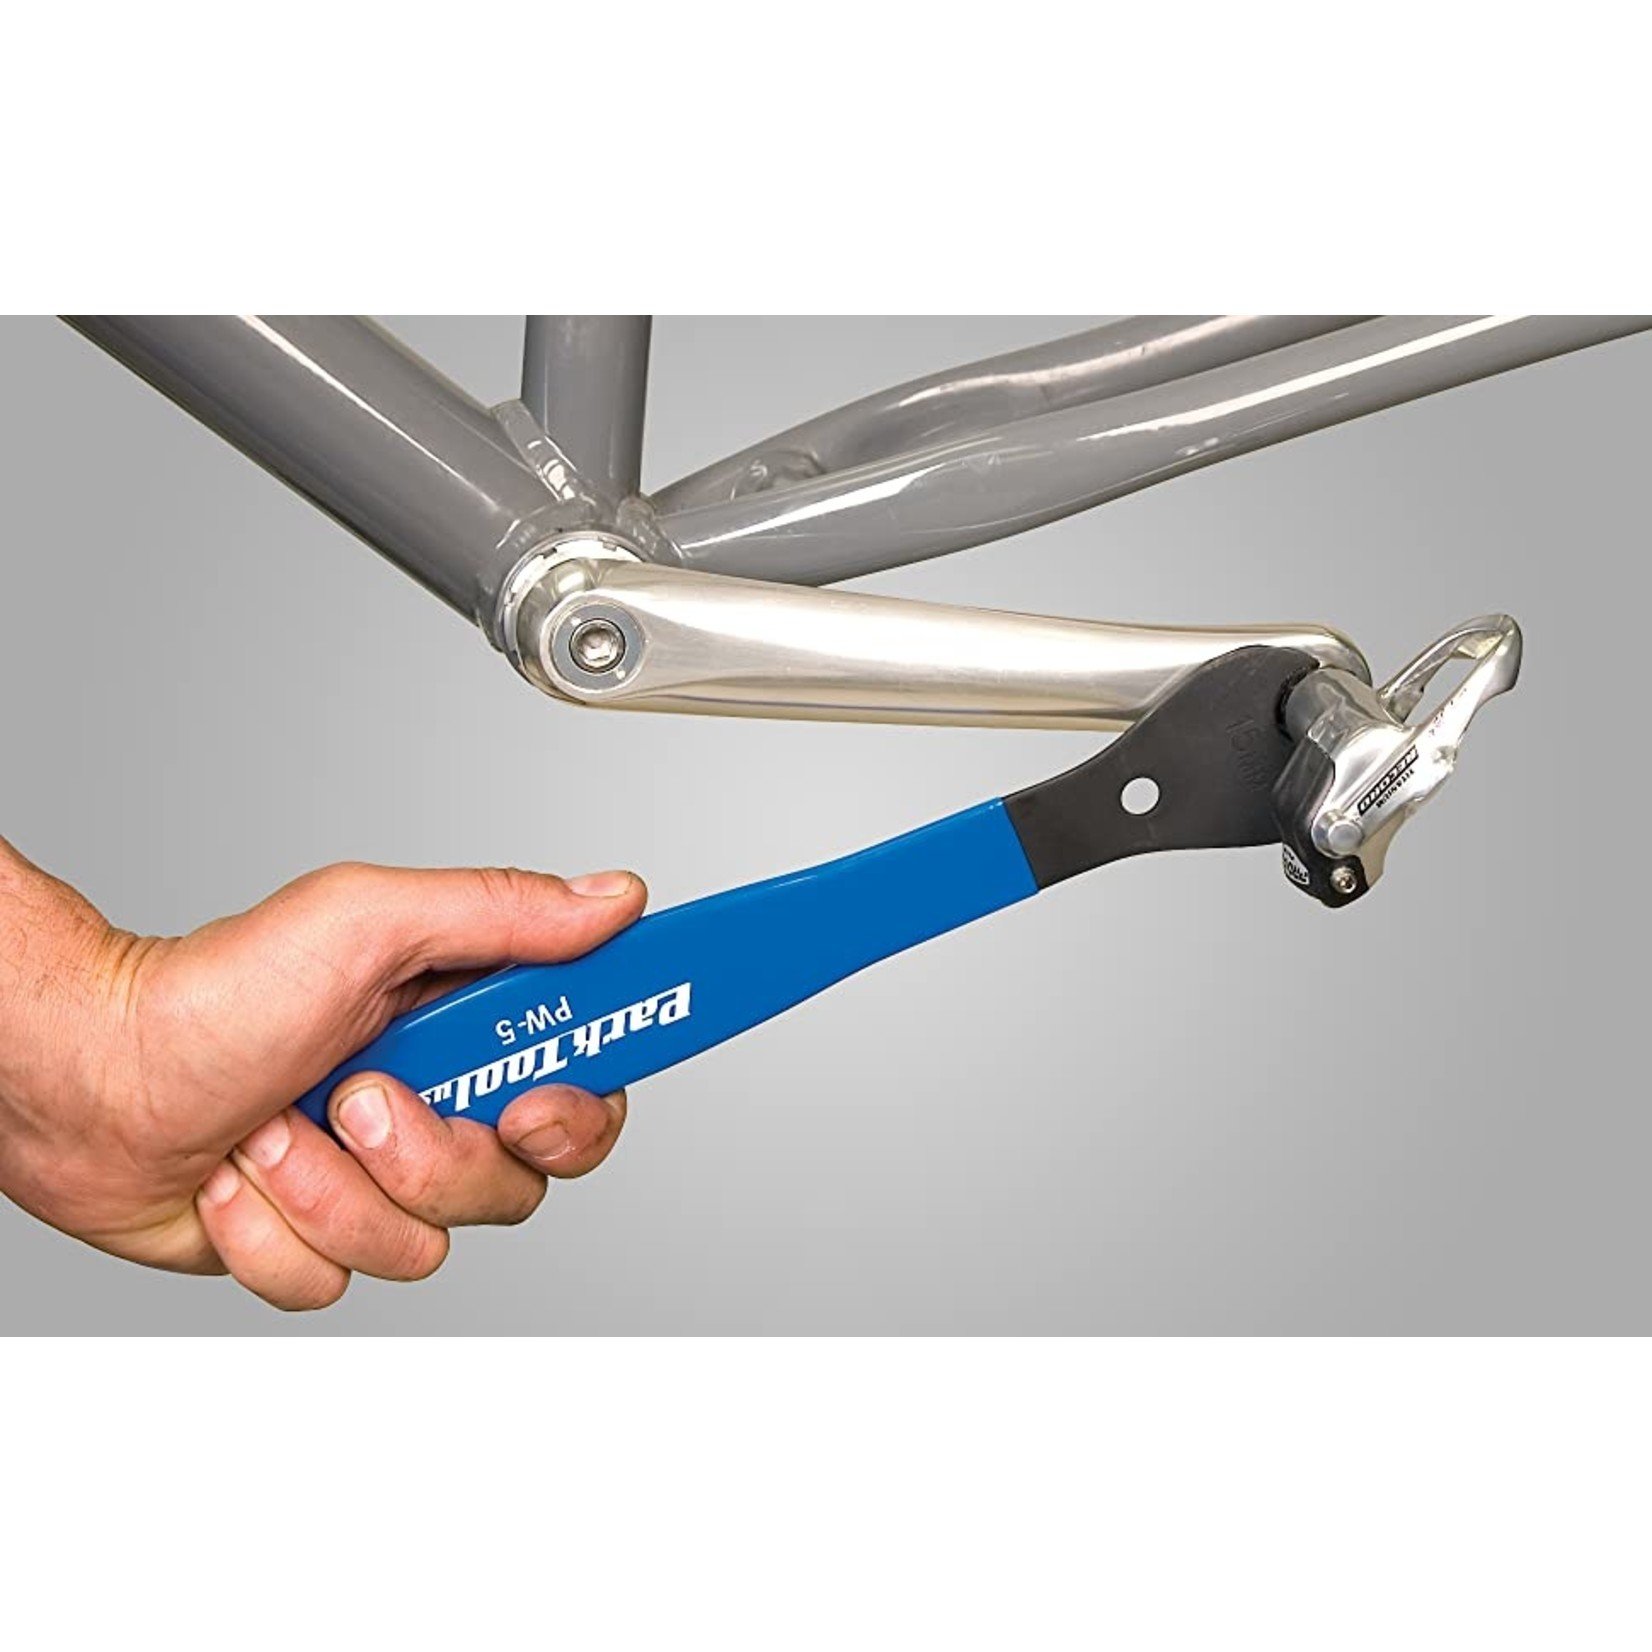 Park Tool Park Tool PW5 15mm Pedal Wrench